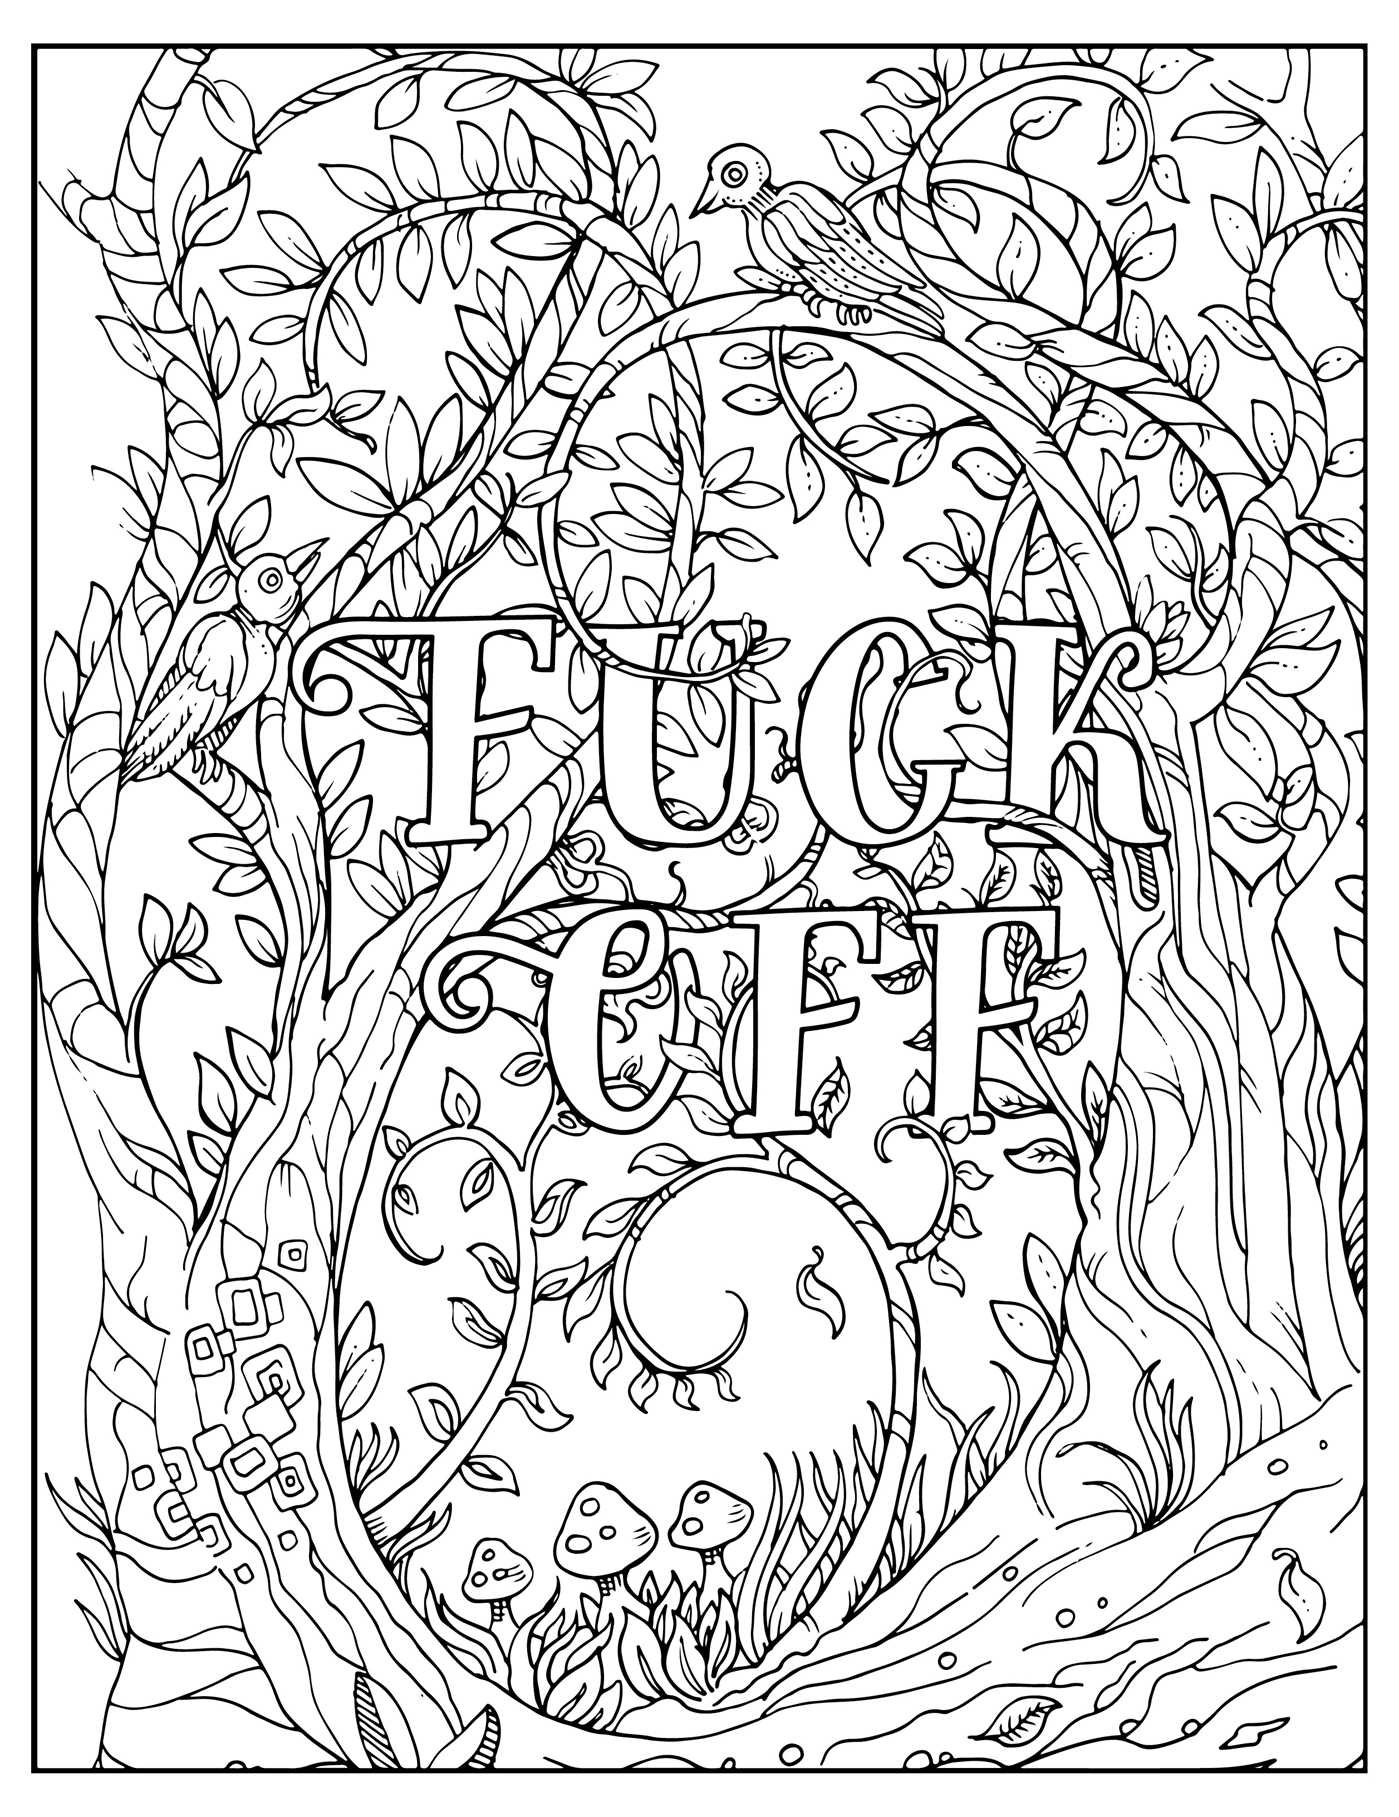 Swearing Coloring Pages At GetDrawings Free Download